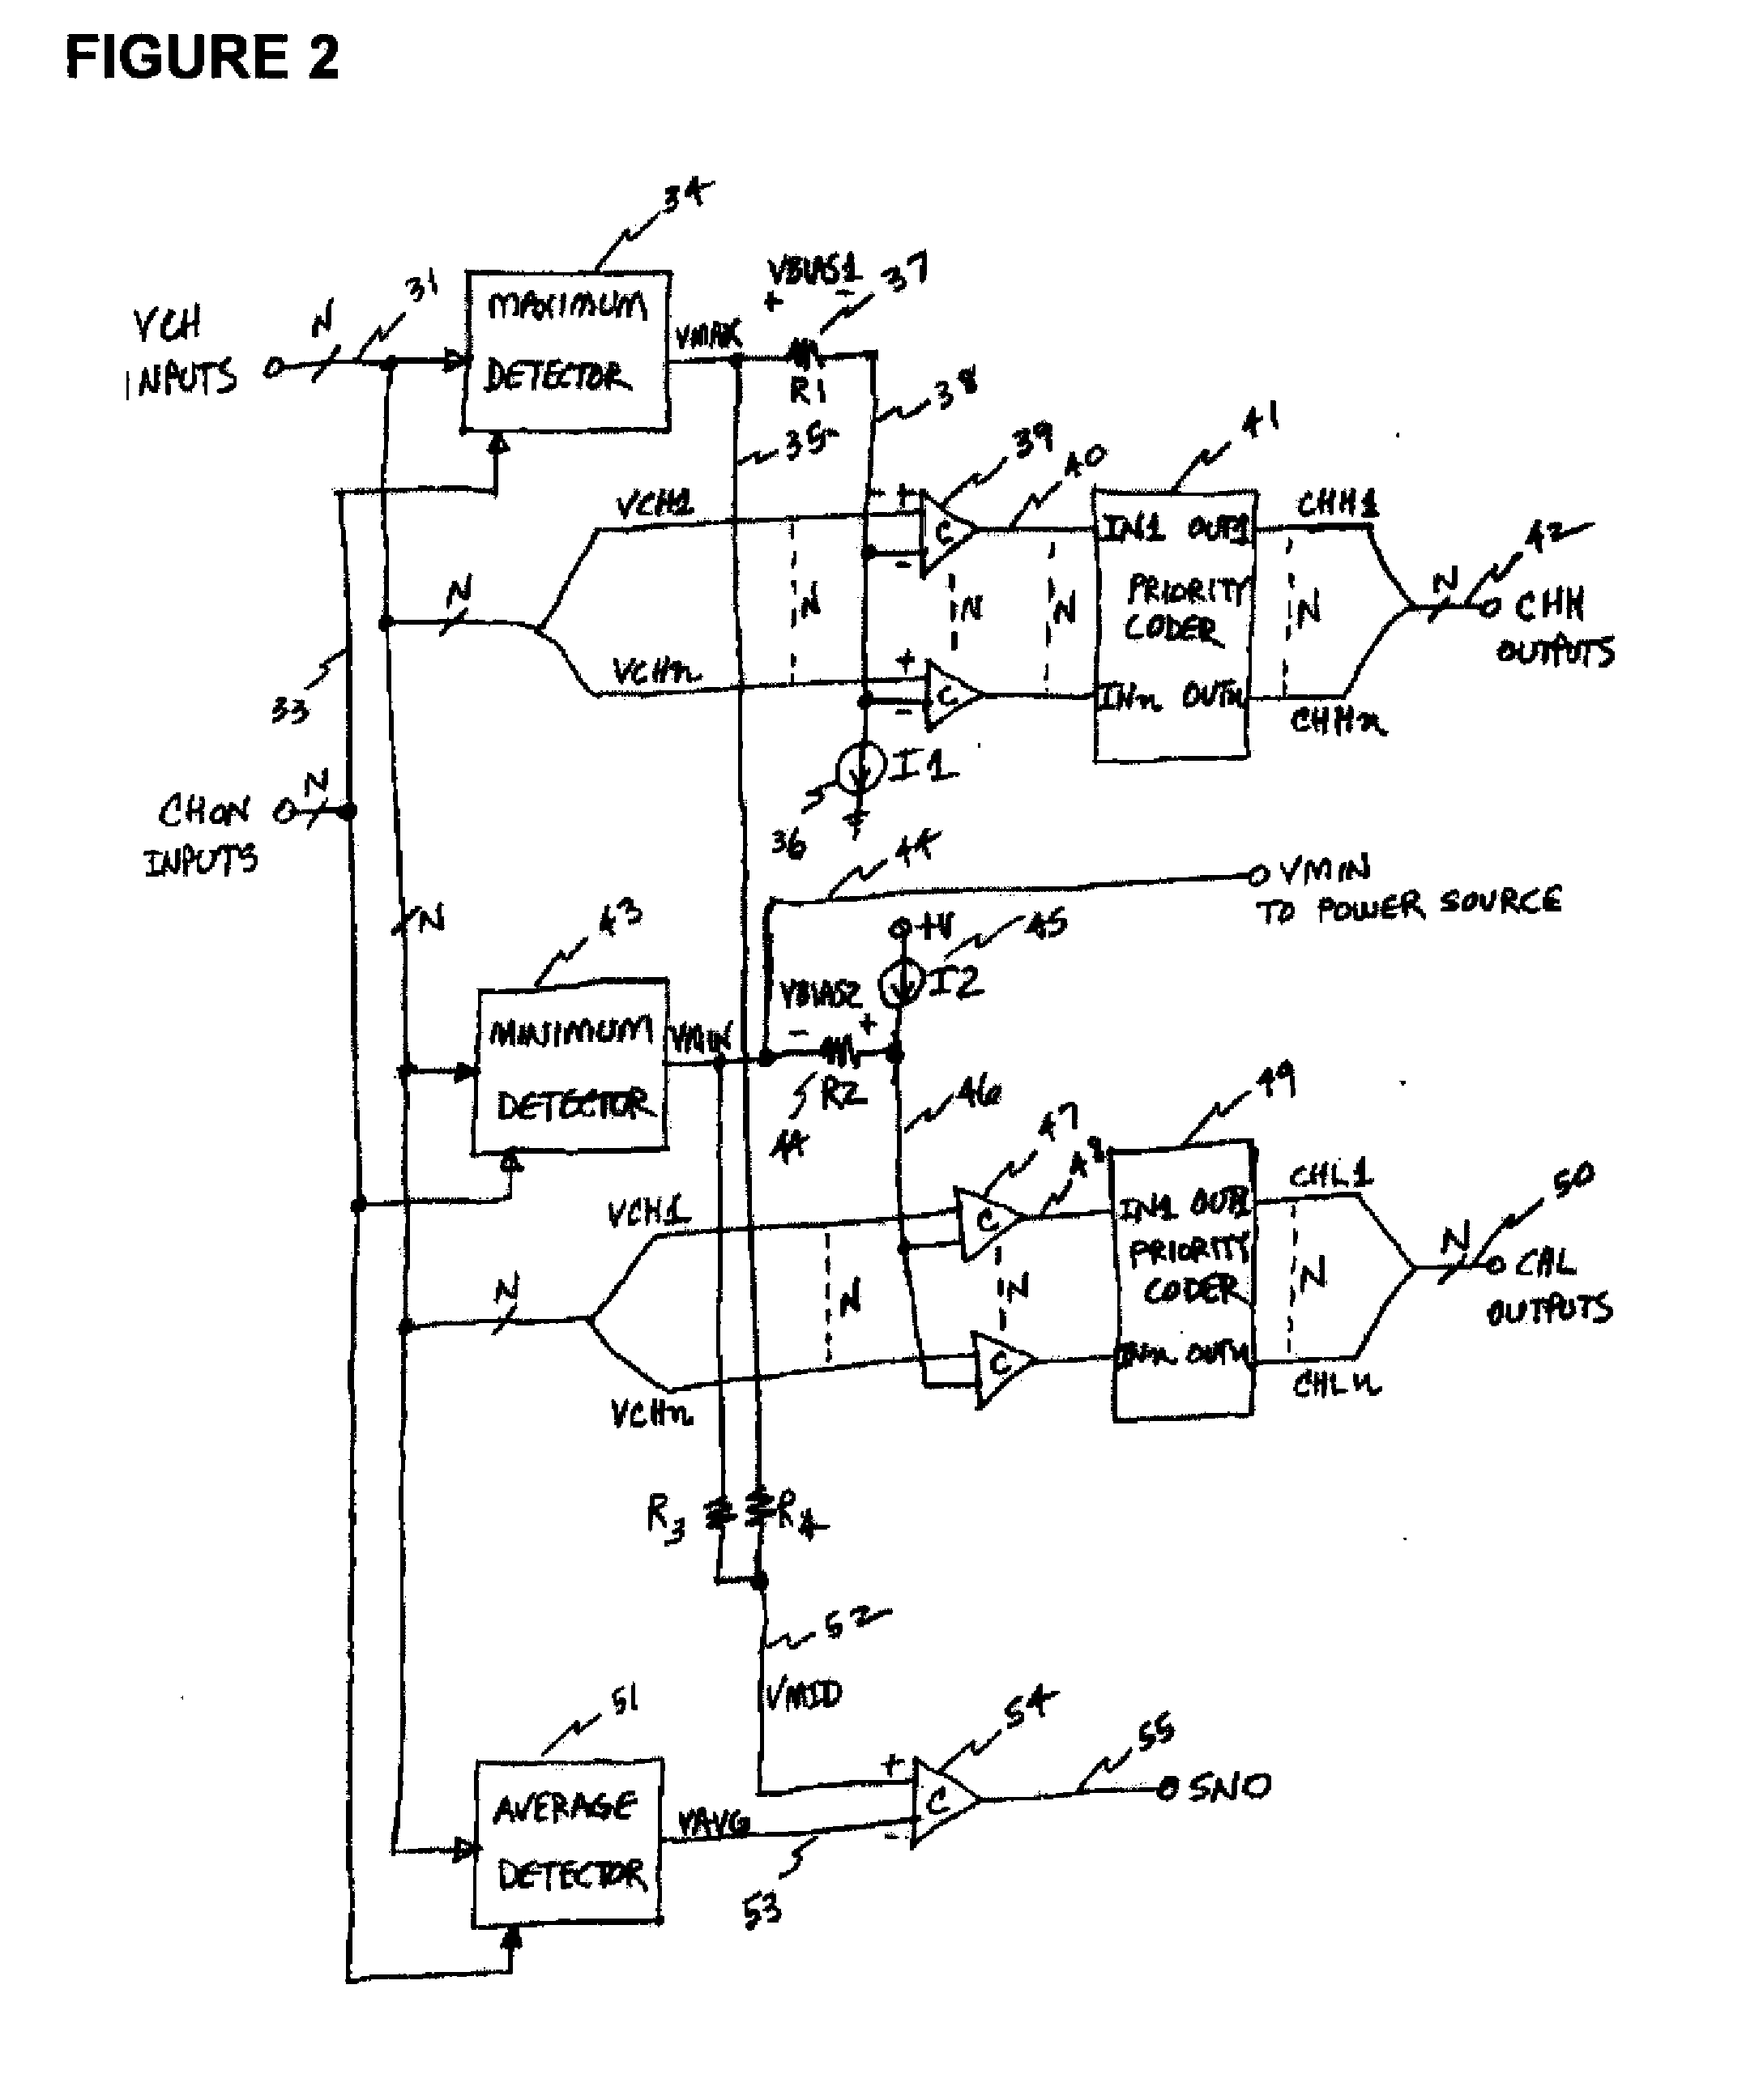 Circuit for detection and control of LED string operation